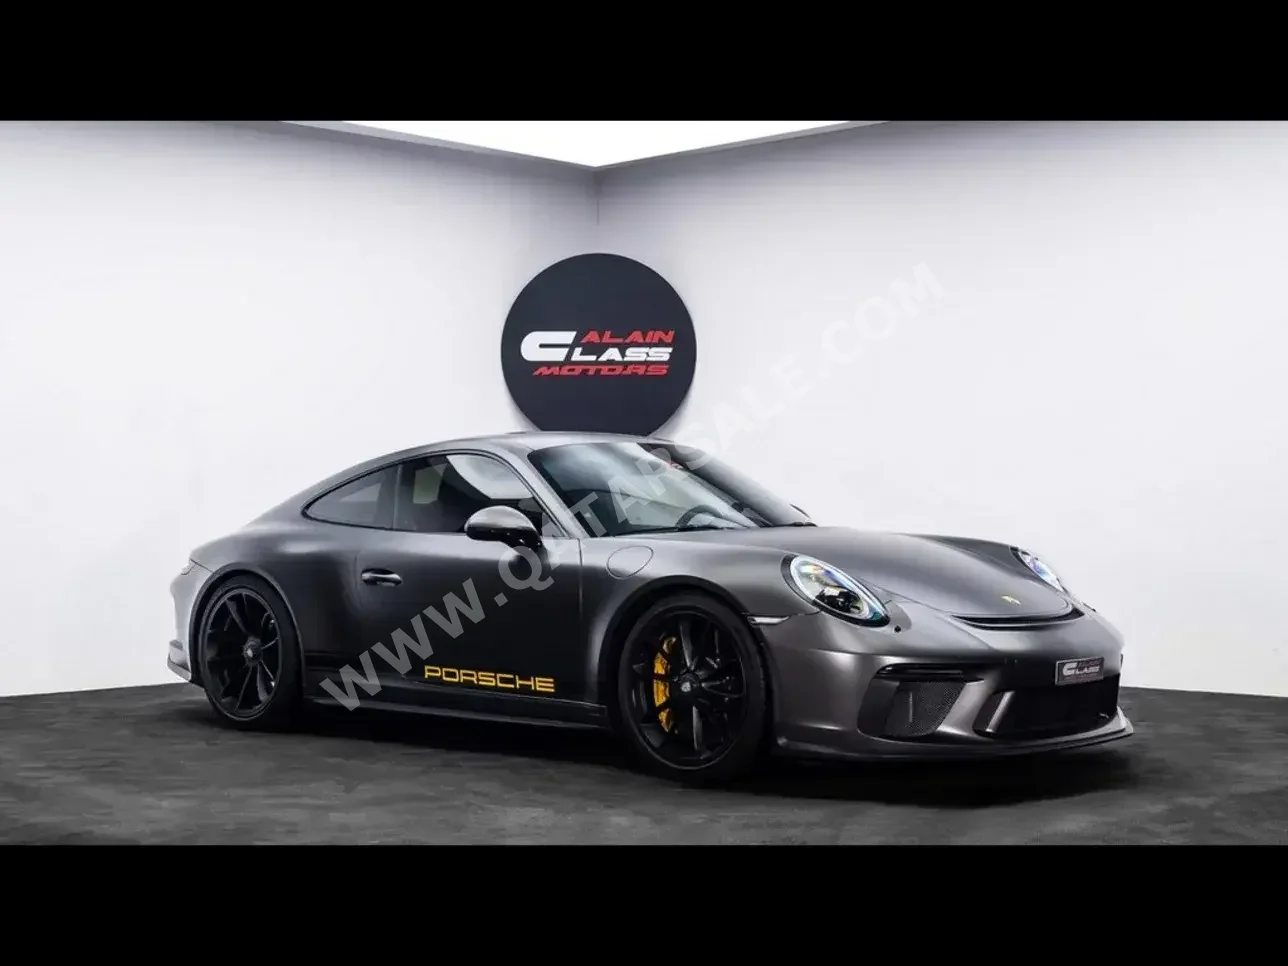 Porsche  911  GT3 Touring  2018  Automatic  14,081 Km  6 Cylinder  Rear Wheel Drive (RWD)  Coupe / Sport  Gray